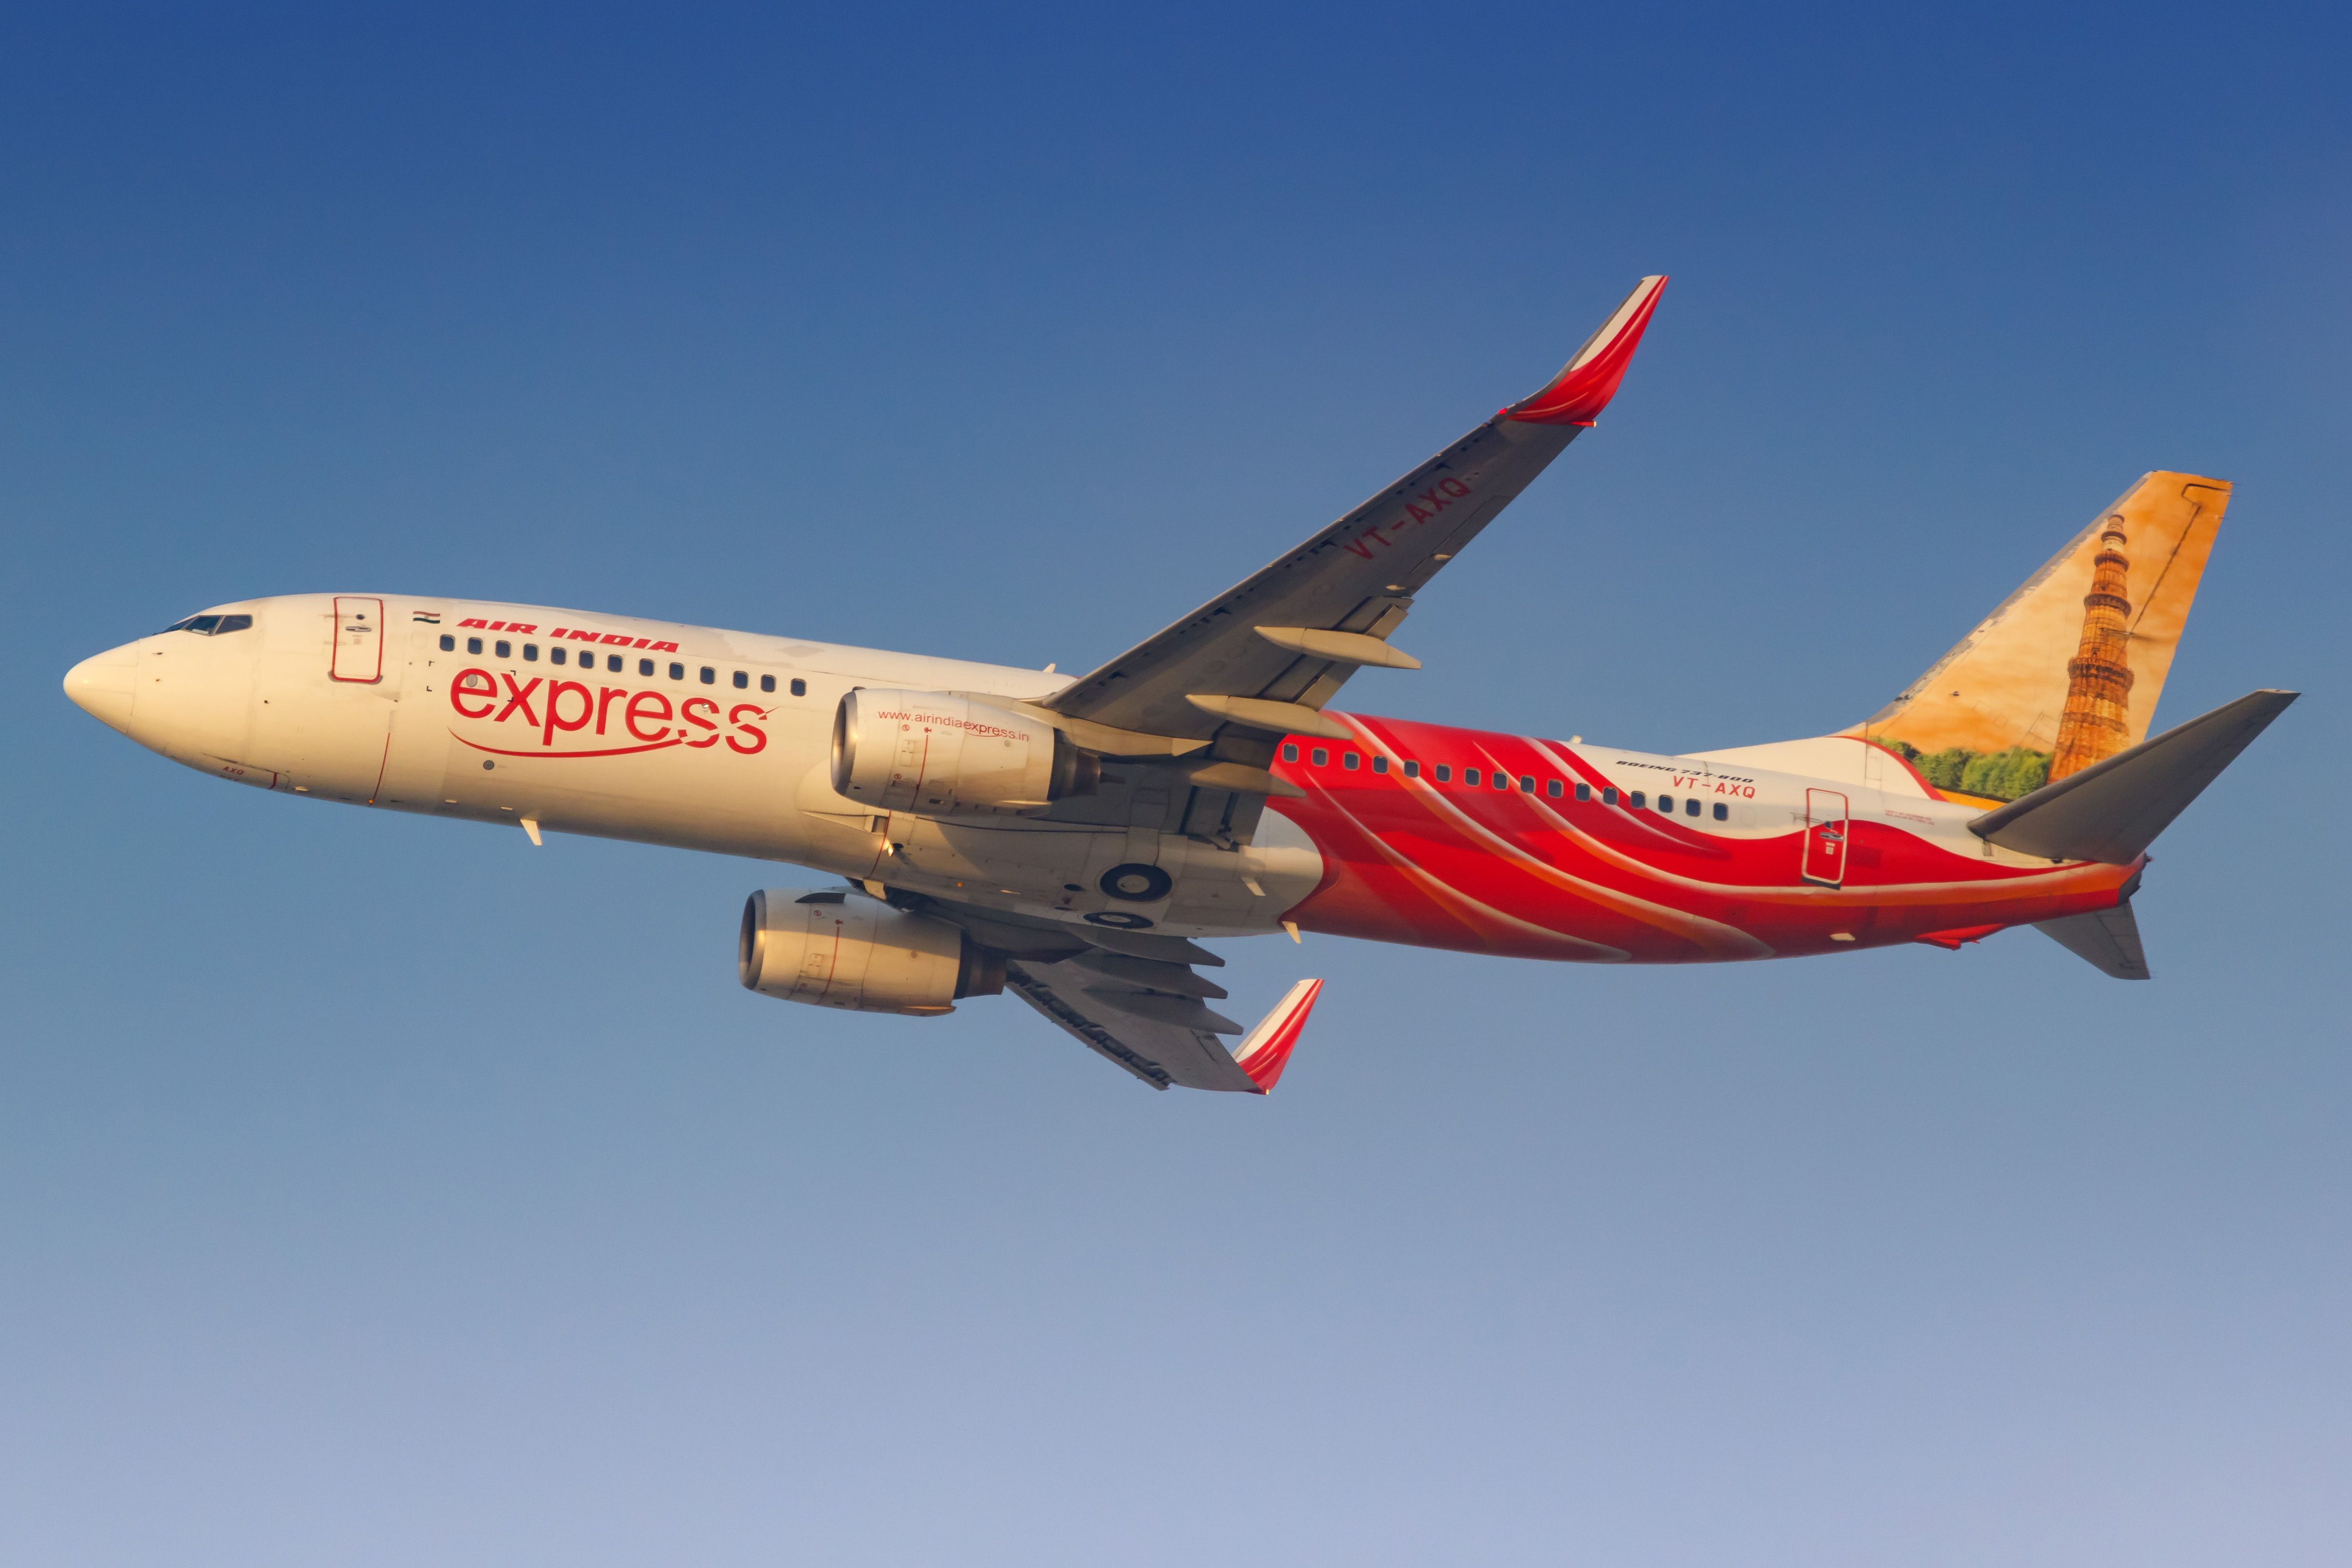 Air India Express Boeing 737-800 in flight